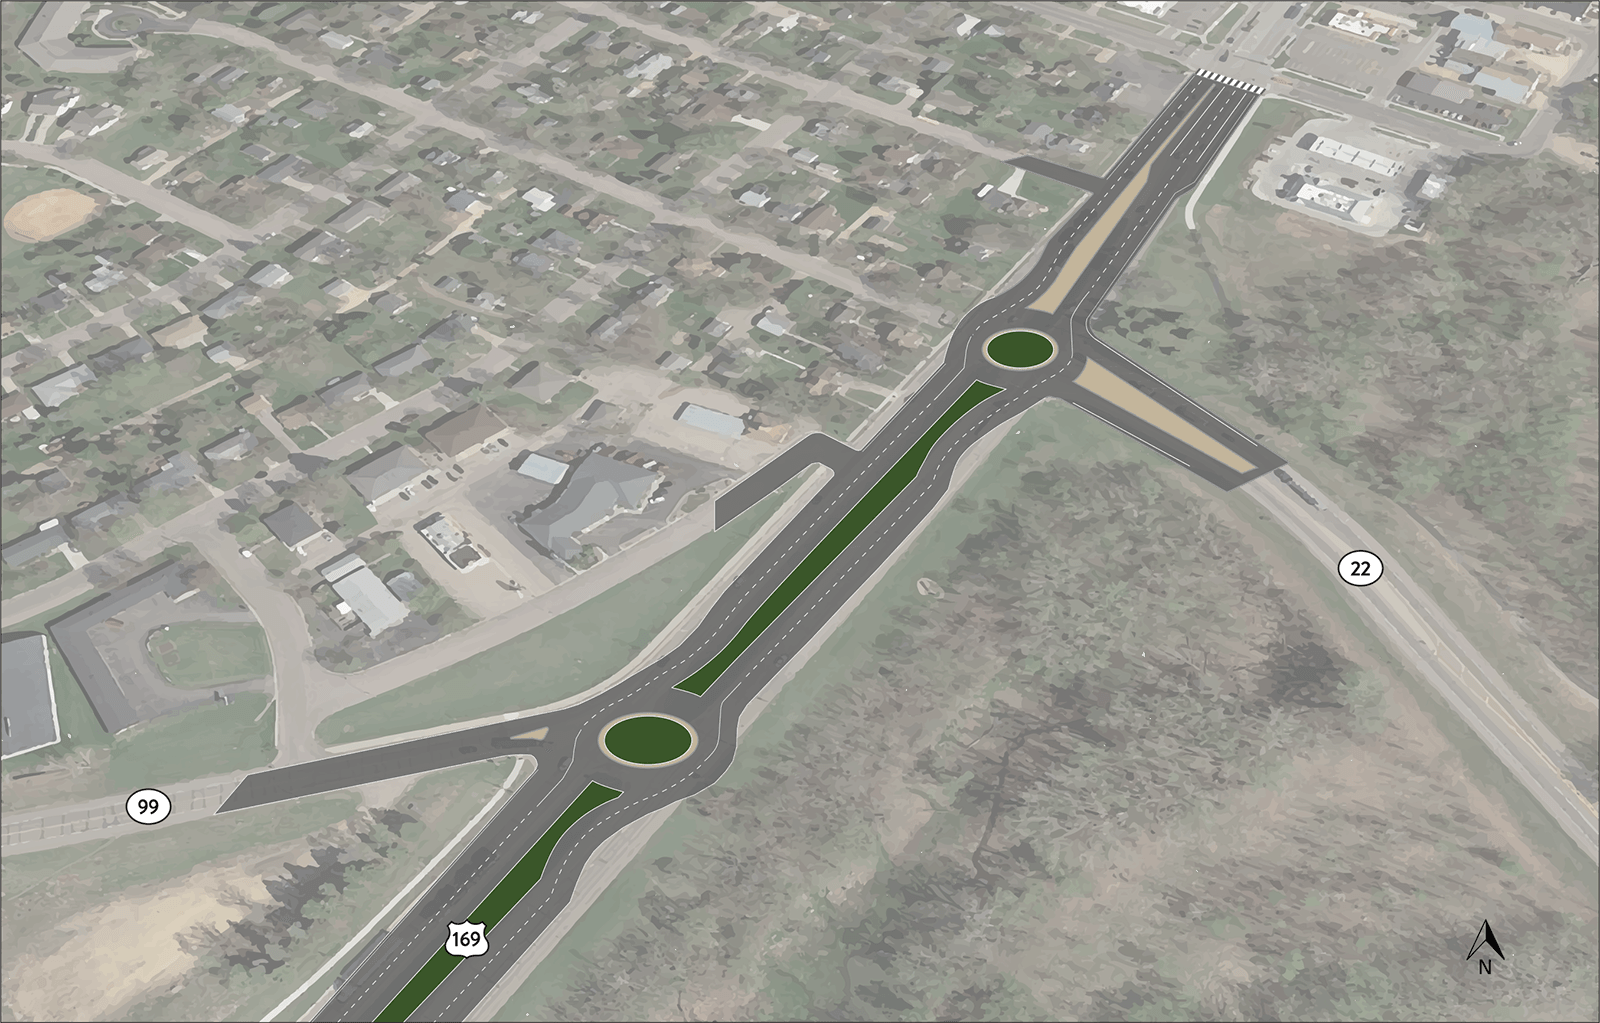 Illustration showing Concept B Build Alternative for Hwy 169, Hwy 22 and Hwy 99 in St. Peter, MN. Image shows roundabouts installed at the Hwy 169/22 intersection and the Hwy 169/99 intersection.